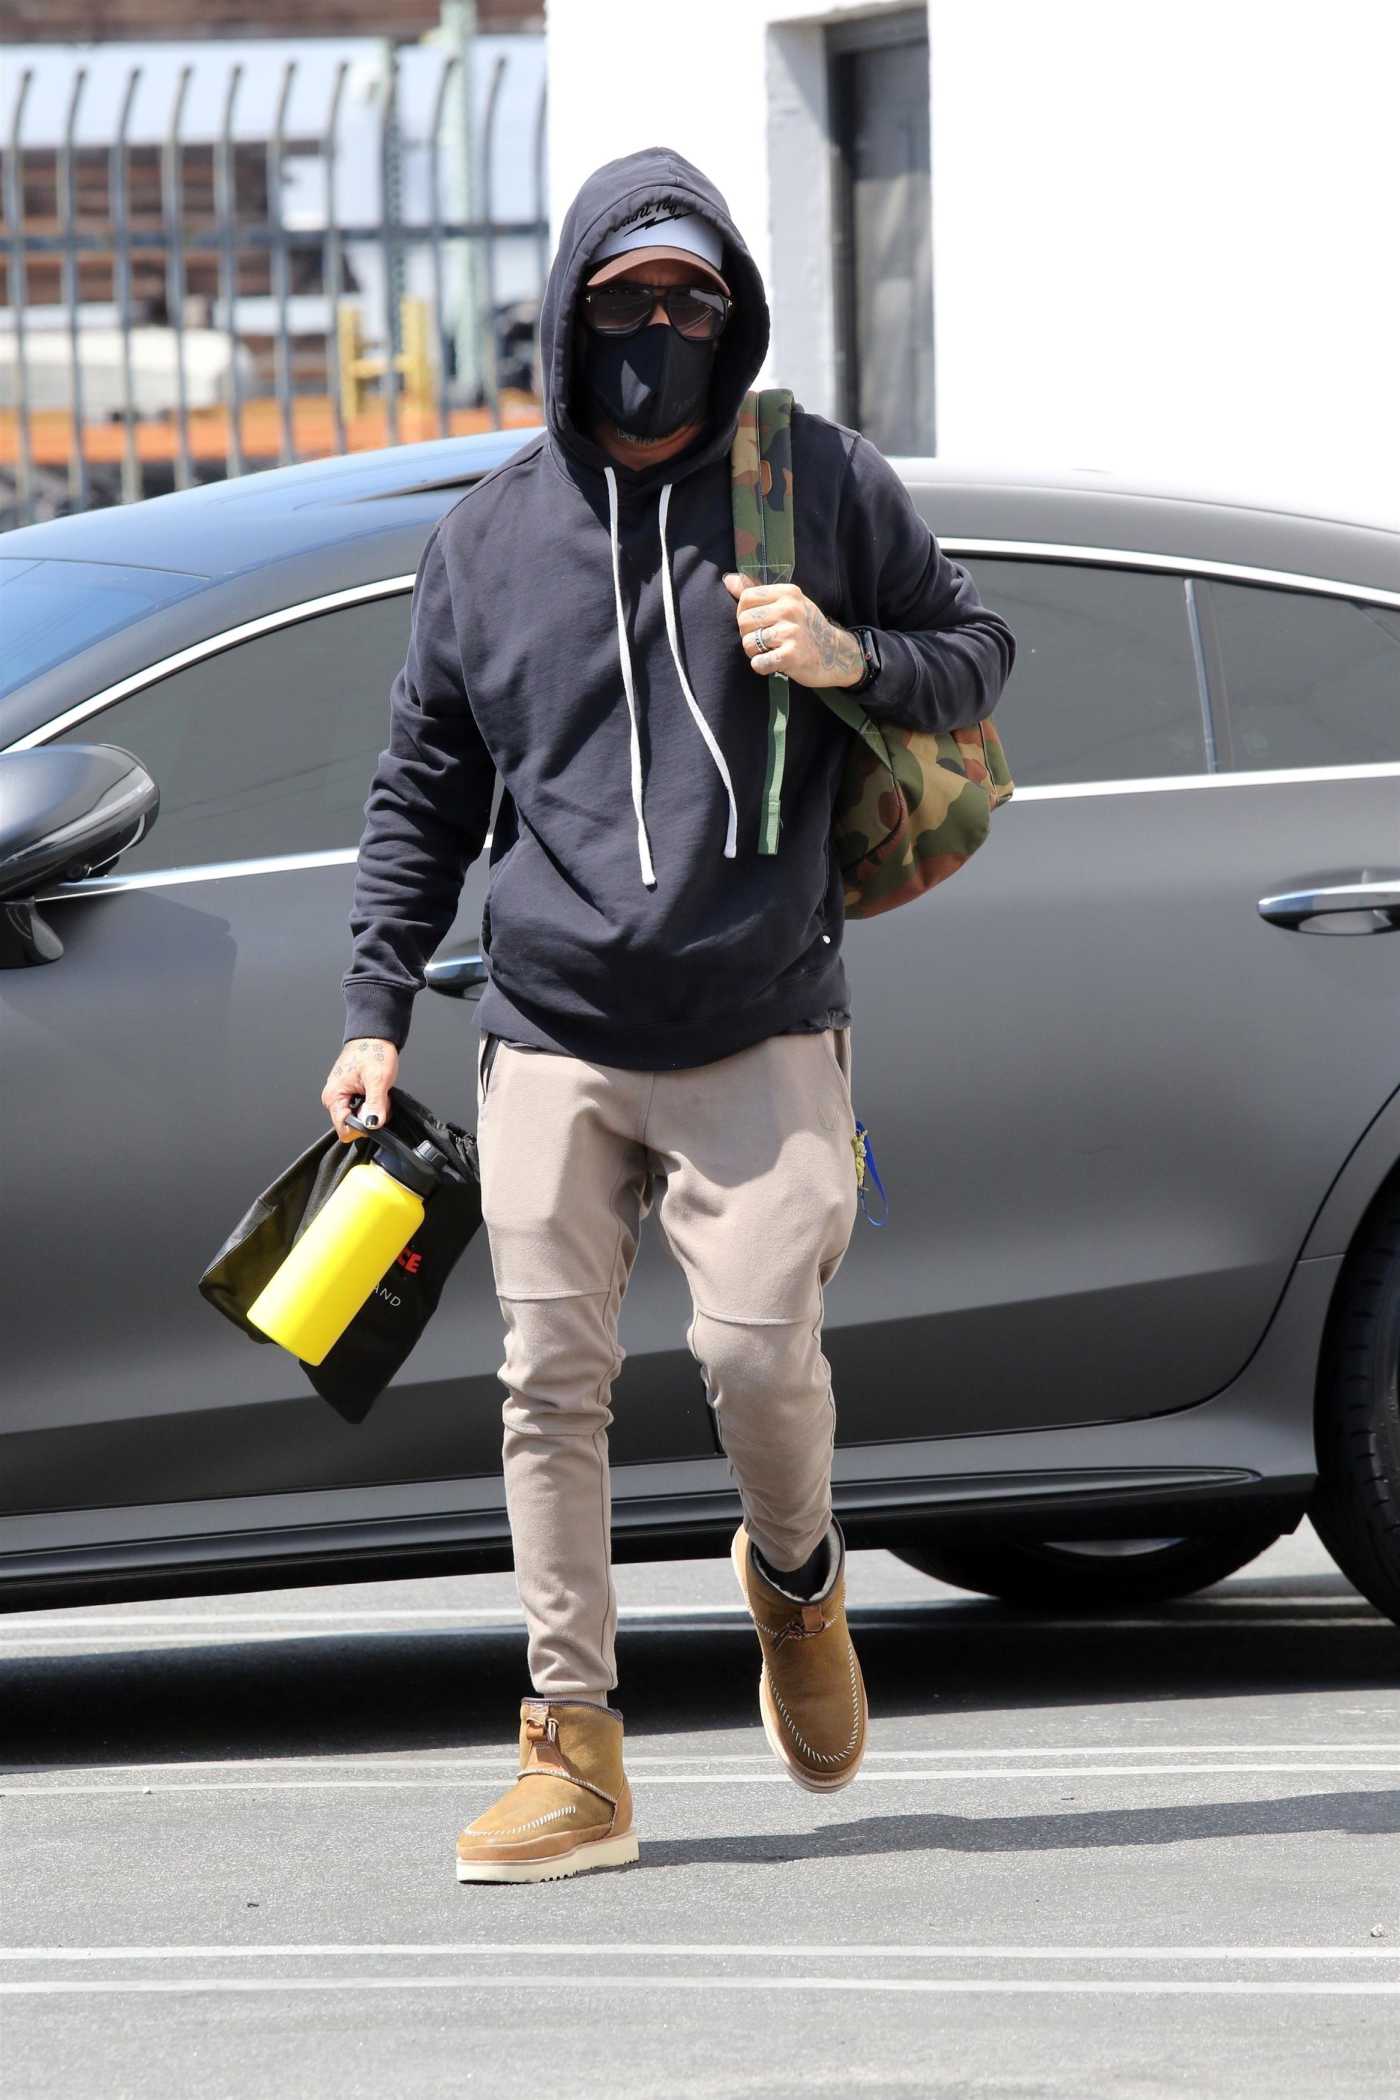 AJ McLean in a Black Hoody Goes to the DWTS Dance Practice in Los Angeles 09/04/2020